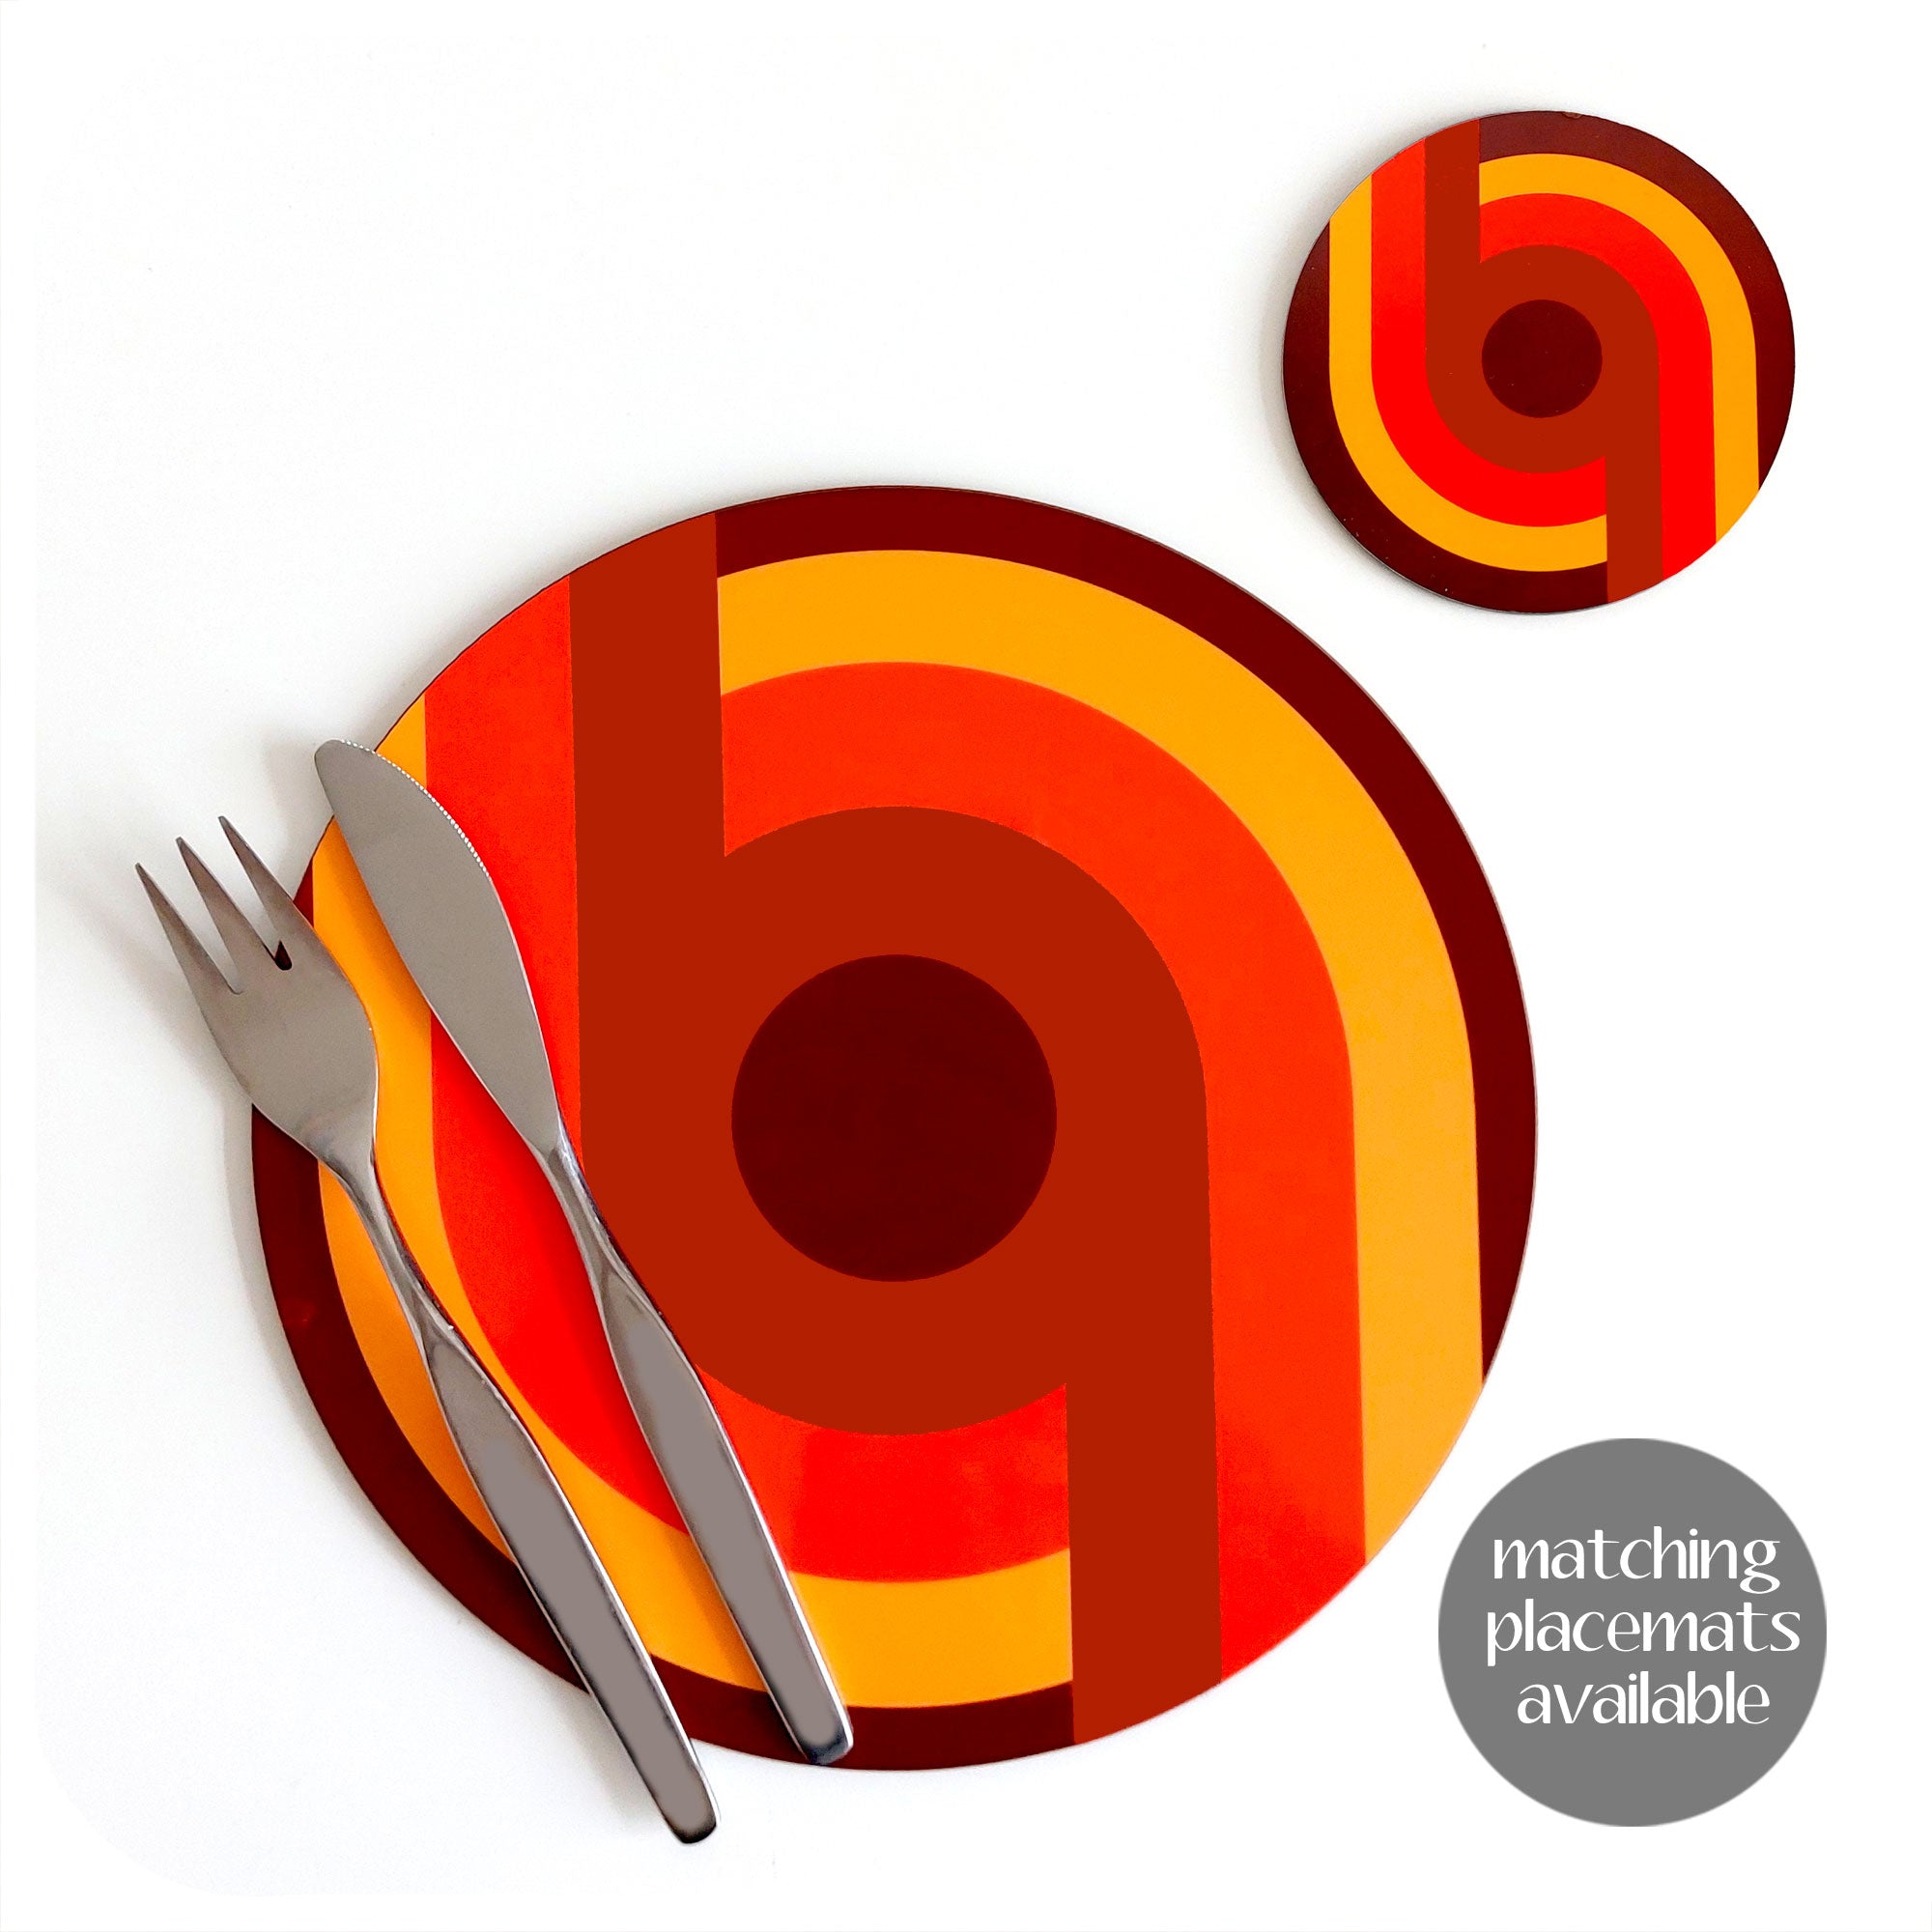 70s Supergraphic style round placemat  and matching coaster on a white table with vintage mid century knife and fork. Text on image reads "matching placemats available" | The Inkabilly Emporium